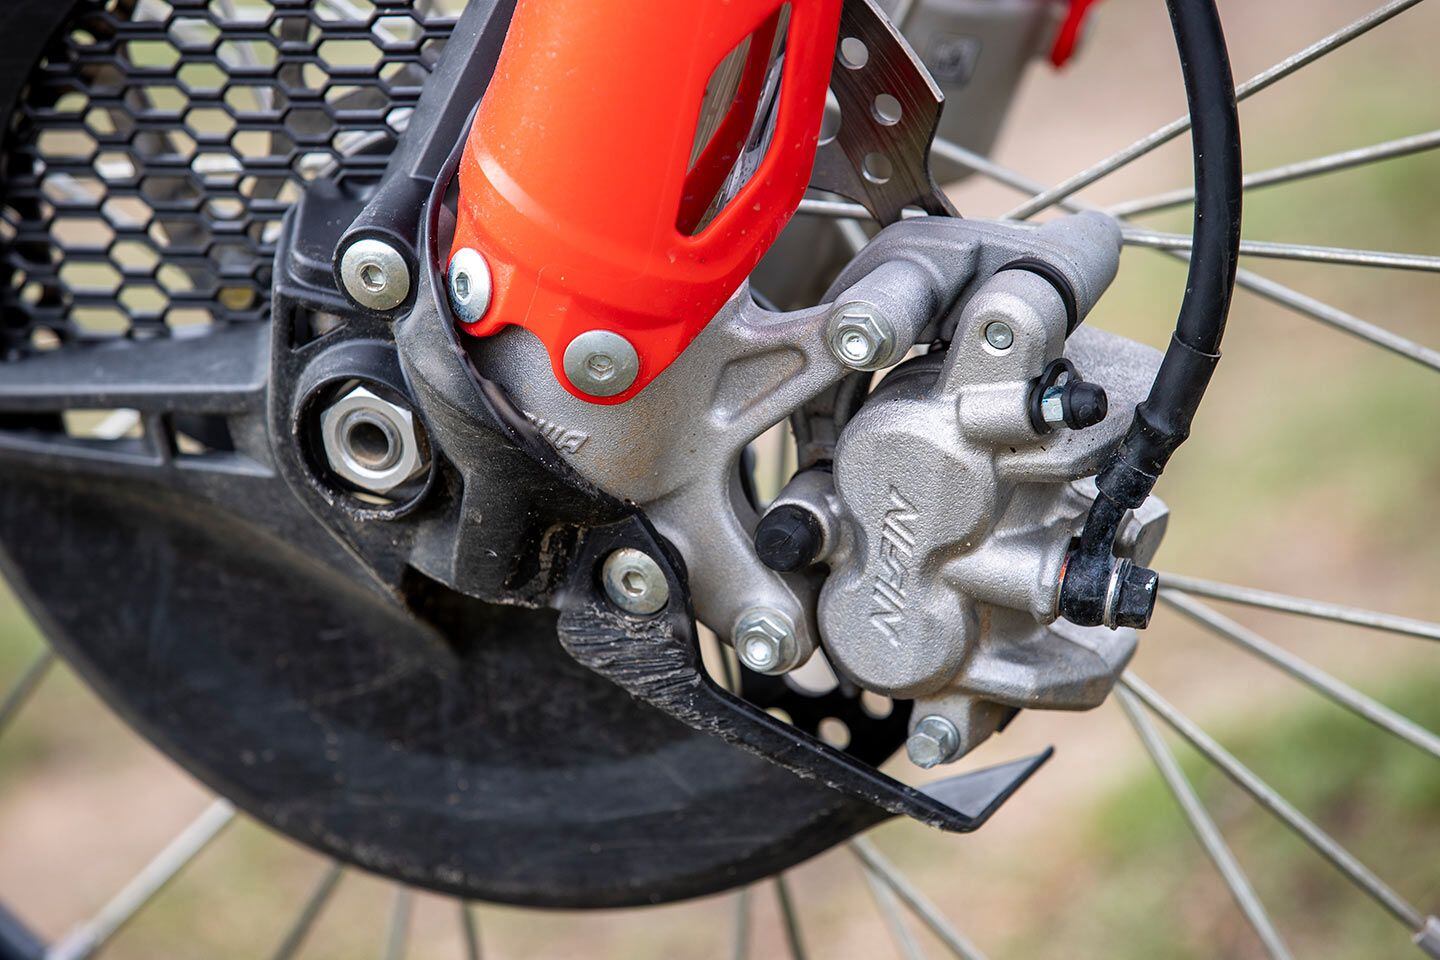 A double-piston Nissin caliper keeps speed in check. The brakes are responsive and offer pleasing response.